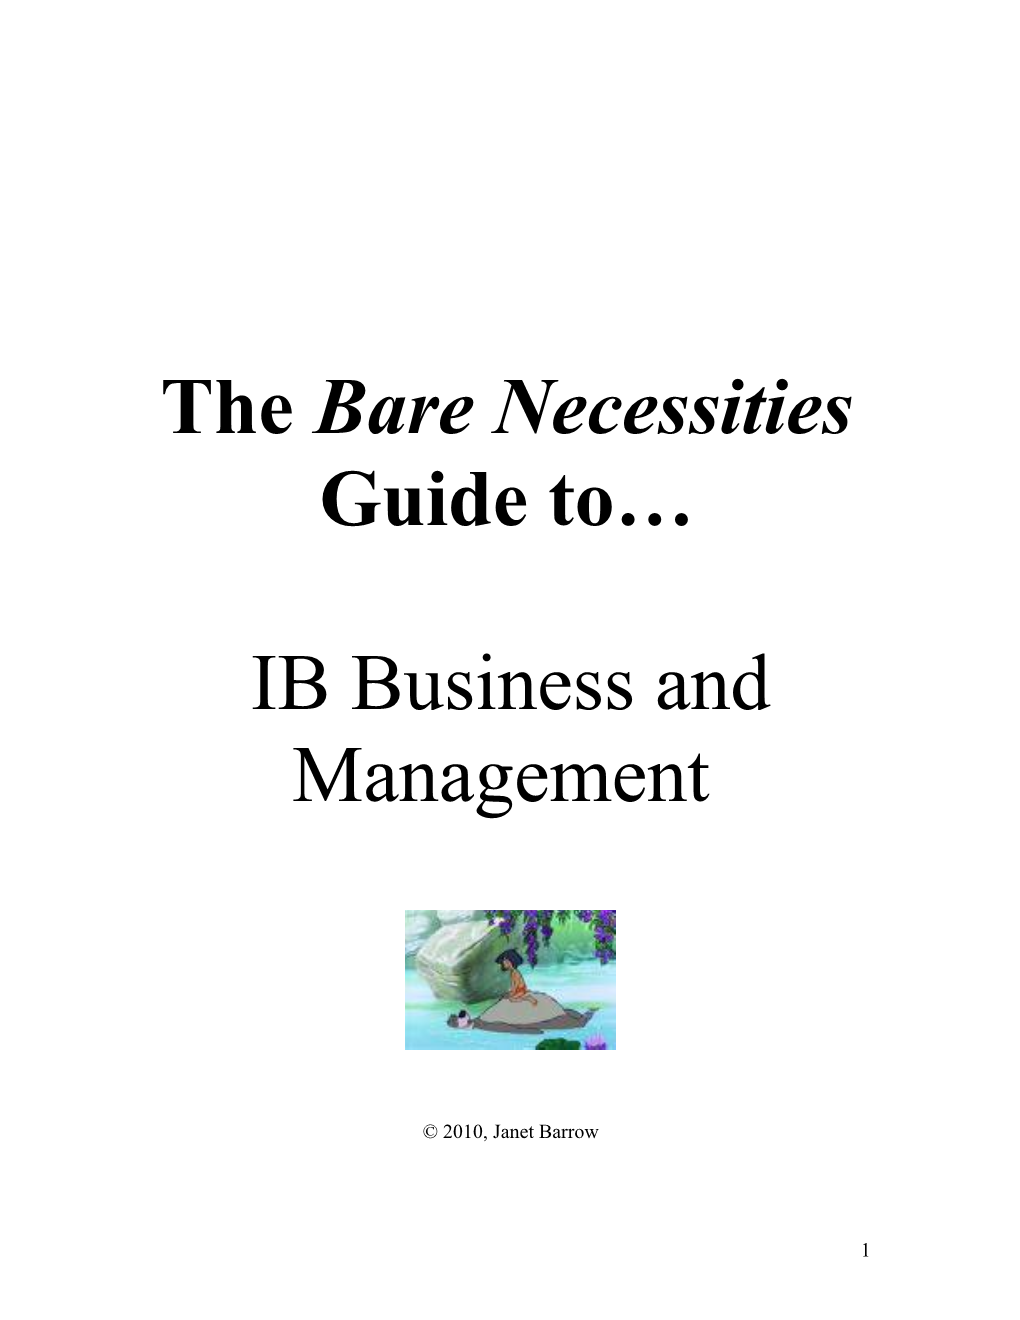 The Bare Necessities Guide To